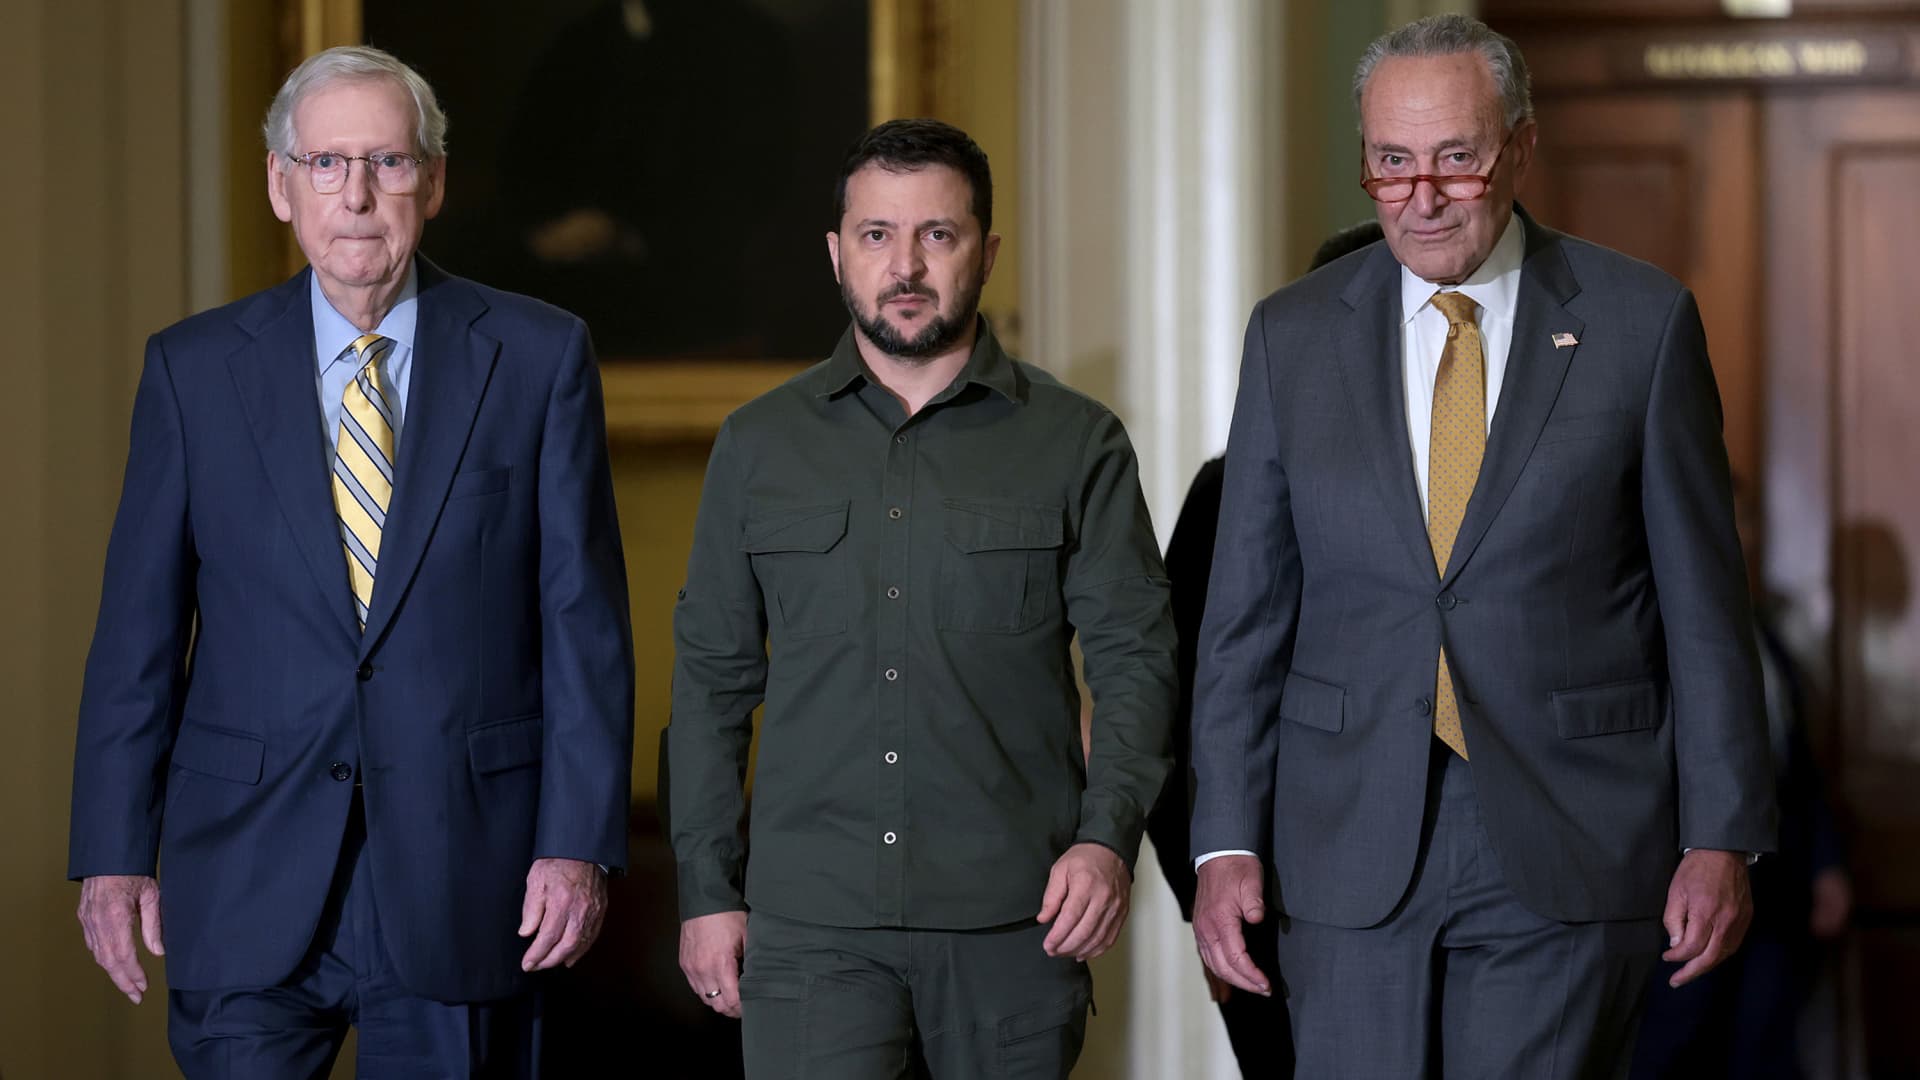 President of Ukraine Volodymyr Zelensky (C) walks with Senate Minority Leader Mitch McConnell (L) and Senate Majority Leader Chuck Schumer during his visit to the U.S. Capitol Building on Sept. 21, 2023, in Washington, D.C.